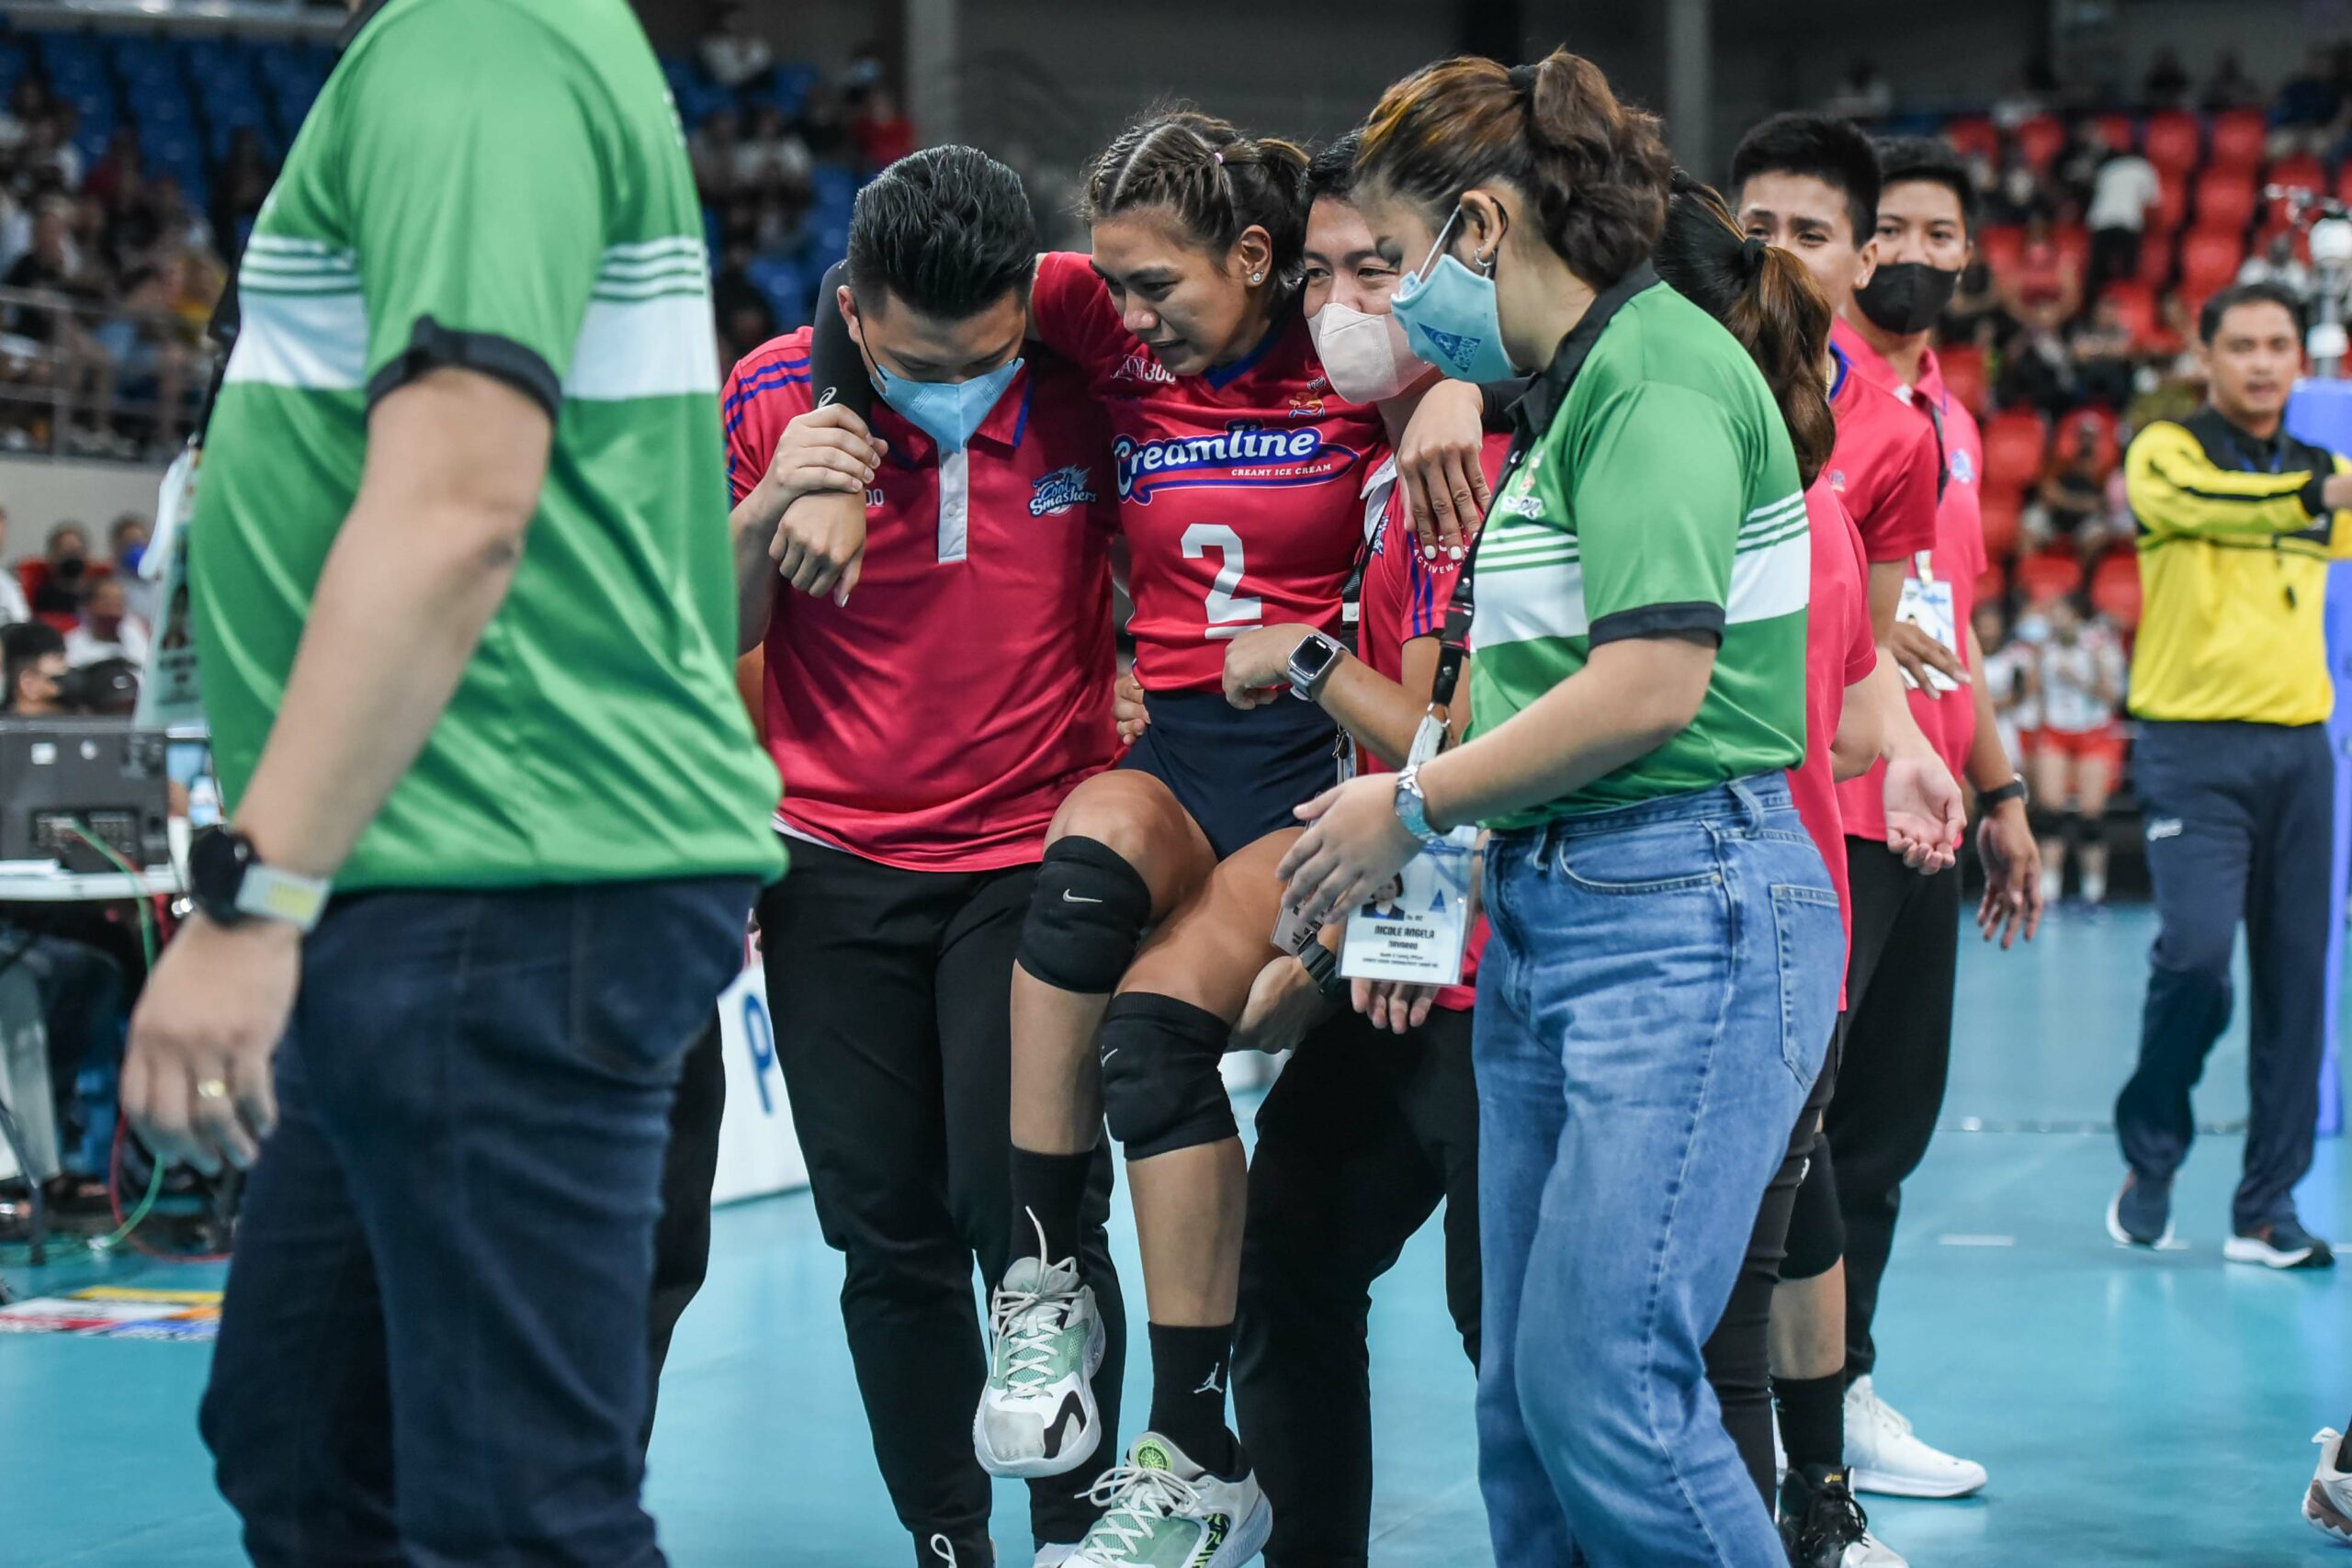 PVL-Reinforced-Creamline-vs.-Chery-bronze-G2-Alyssa-Valdez-7038-scaled PWNVT captainship motivates Valdez to push harder in therapy 32nd SEA Games News PVL Volleyball  - philippine sports news